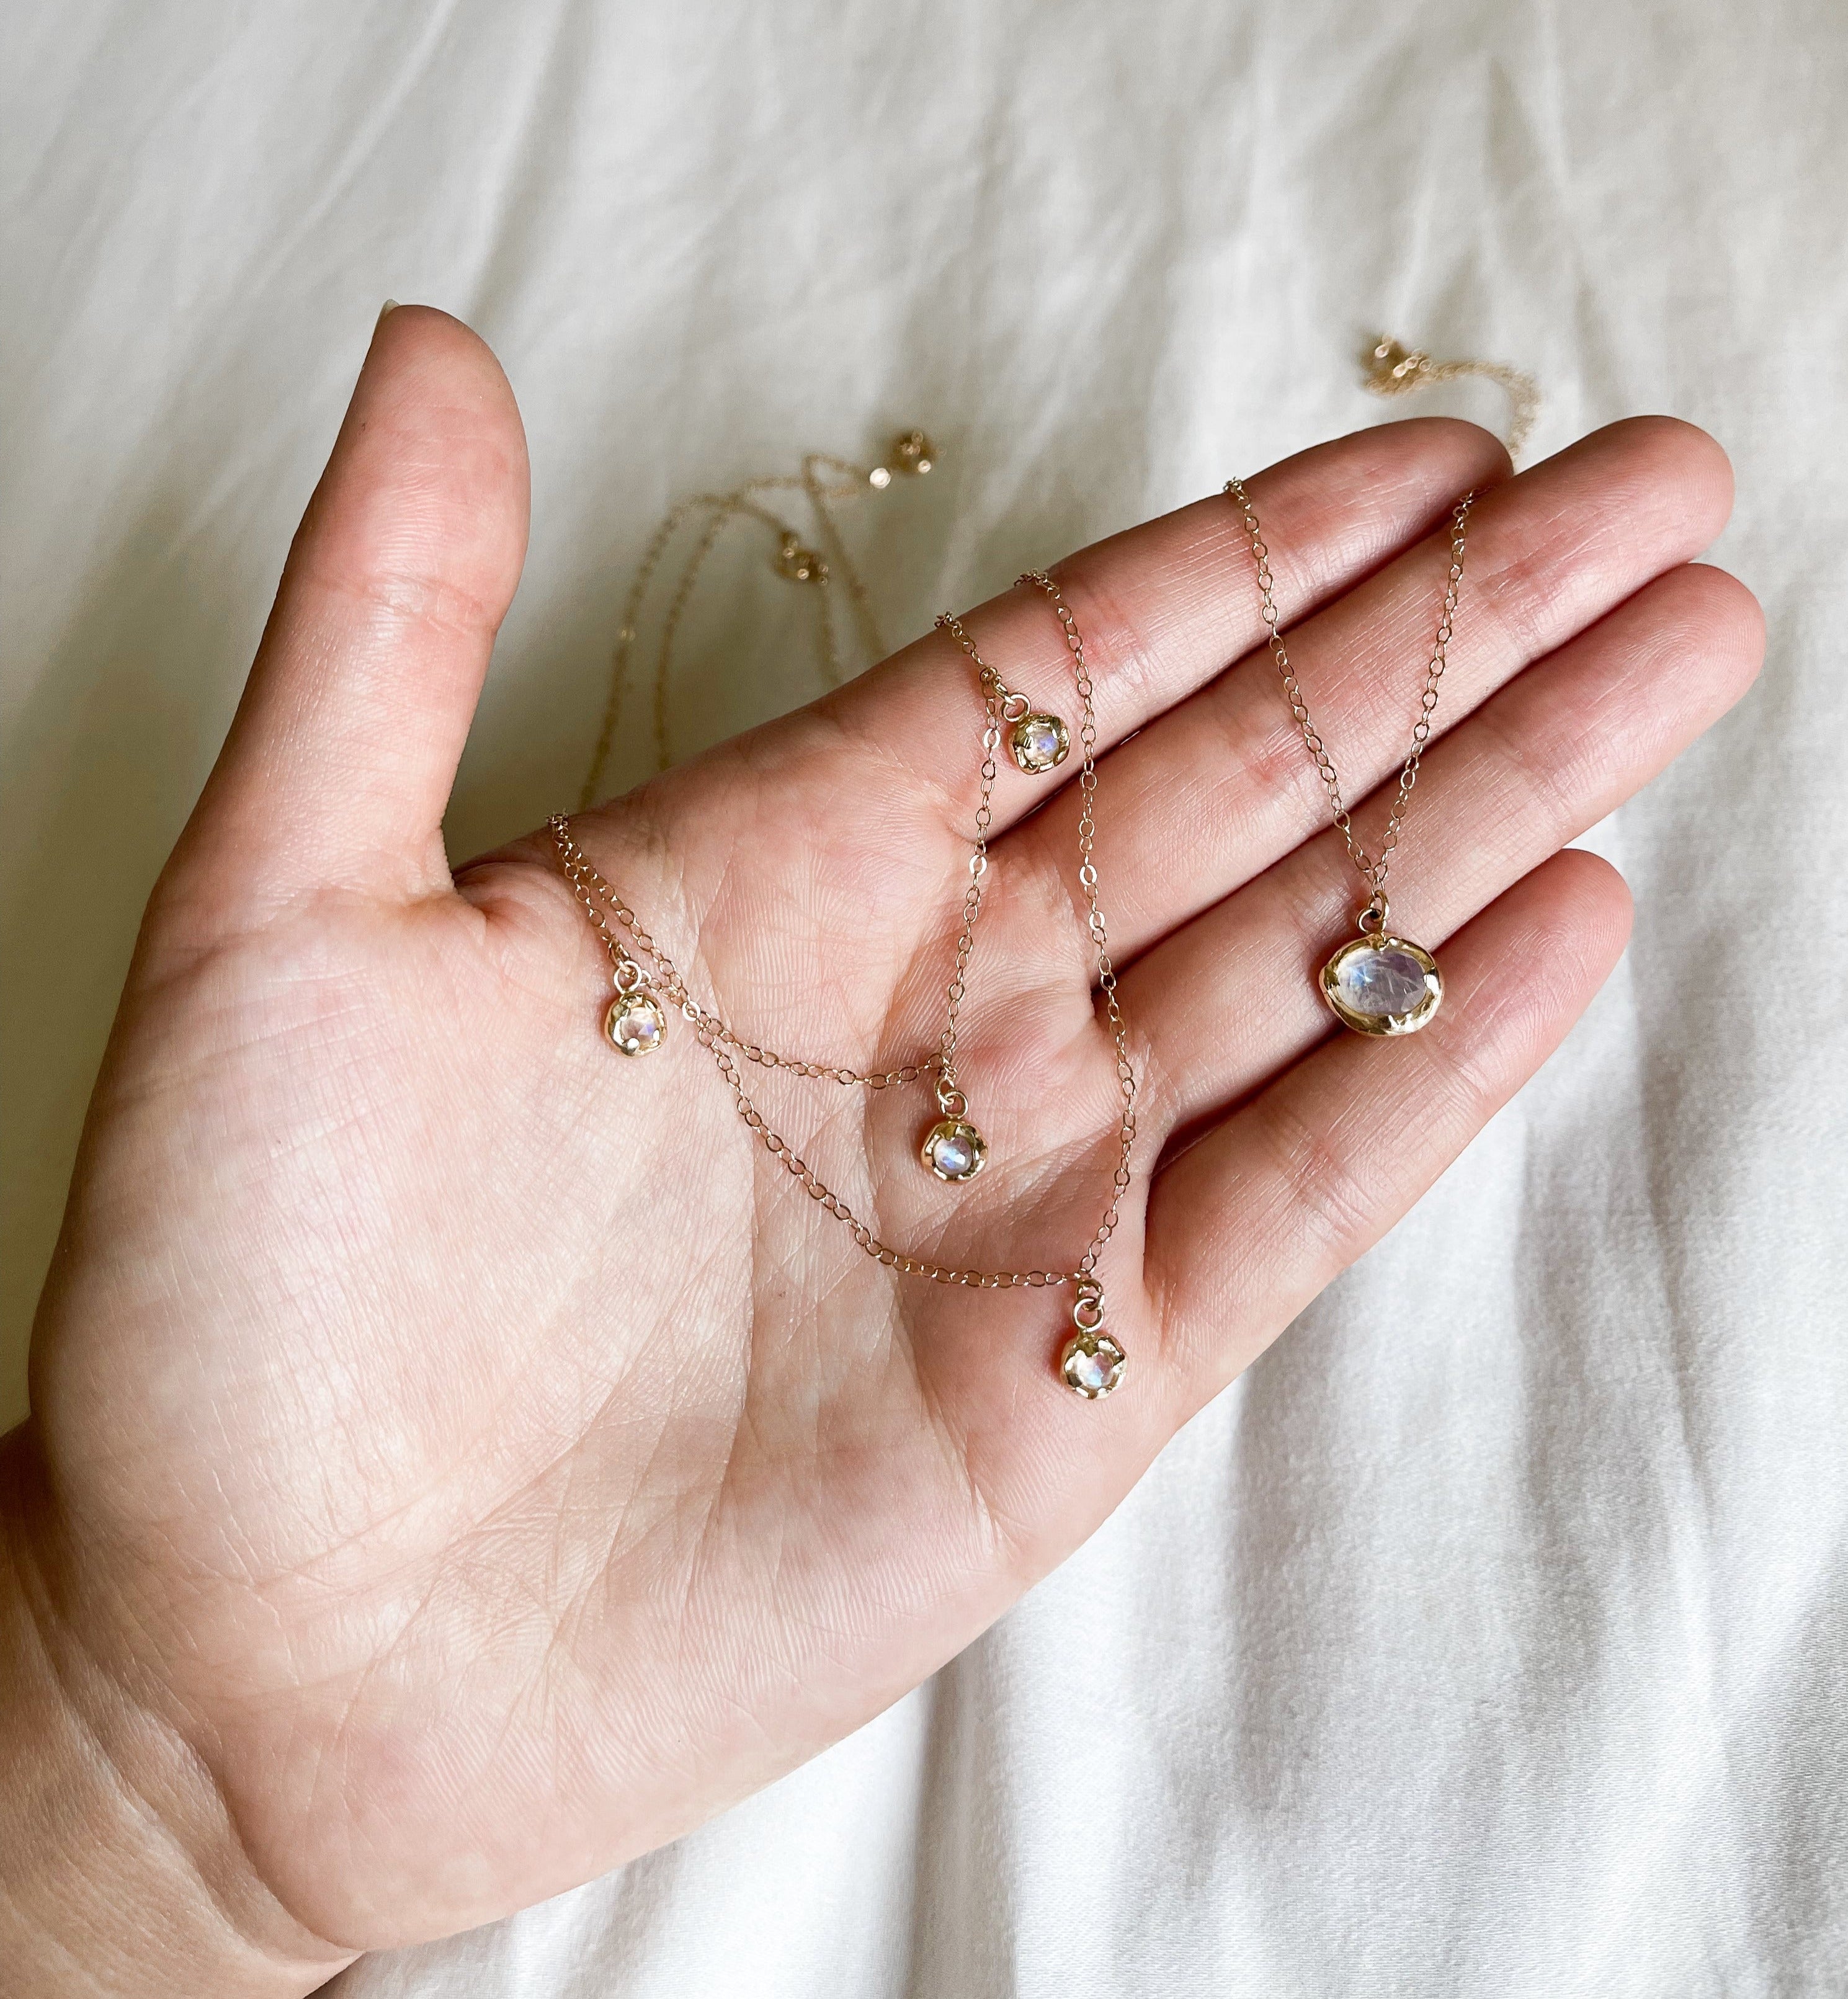 Dainty gold chains with moonstone charms are being held in an open hand